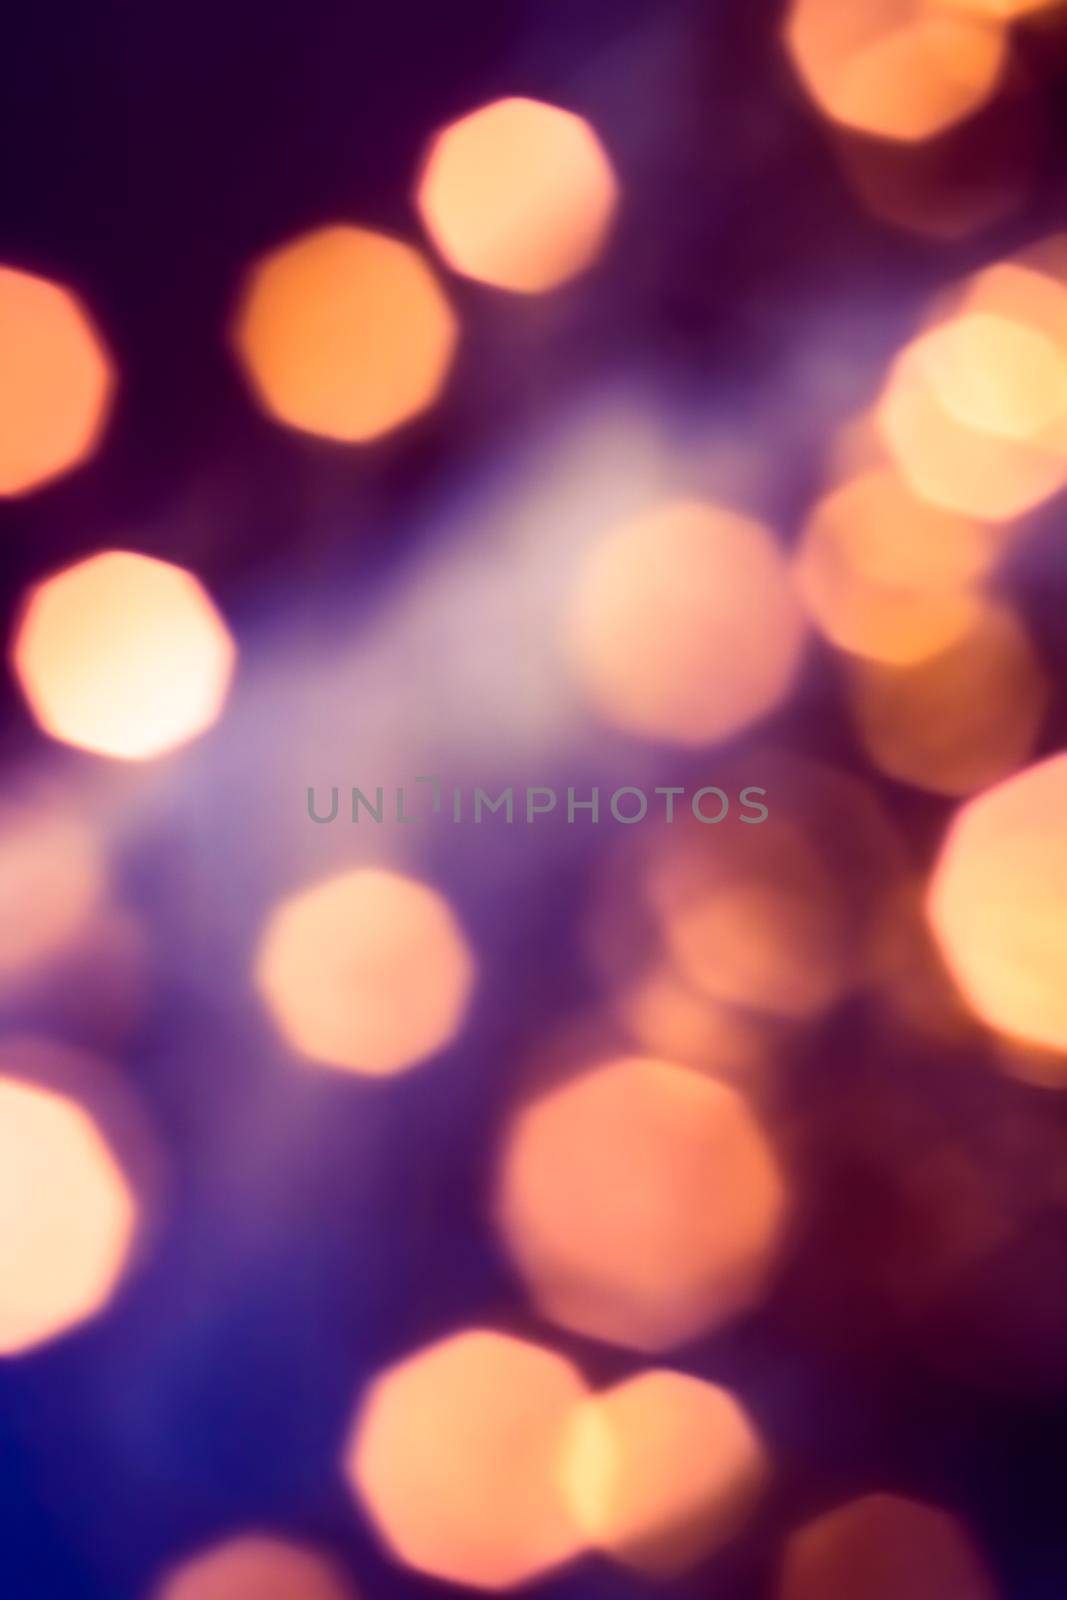 Vintage Christmas lights, New Years Eve fireworks and abstract texture concept - Glamorous golden shiny glow and glitter, luxury holiday background